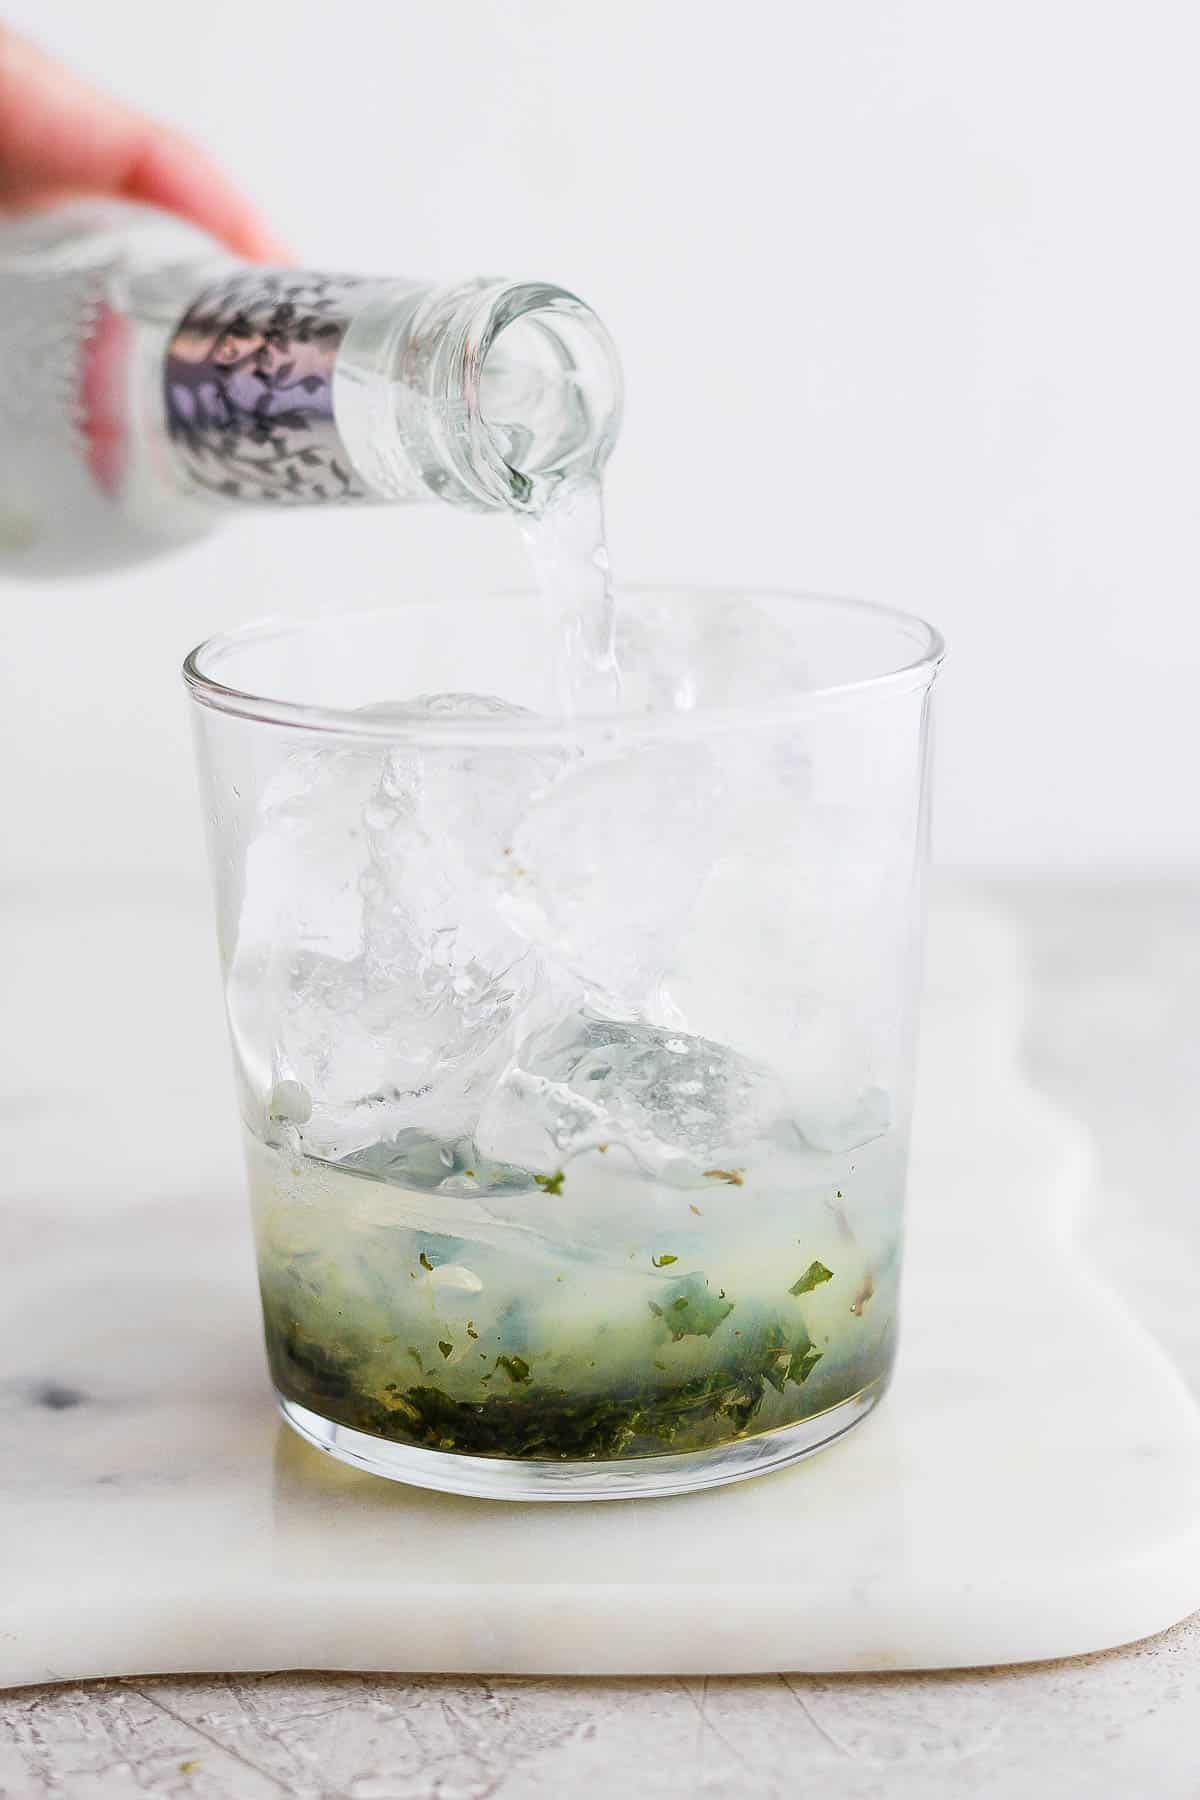 Tonic water being added to the mojito.